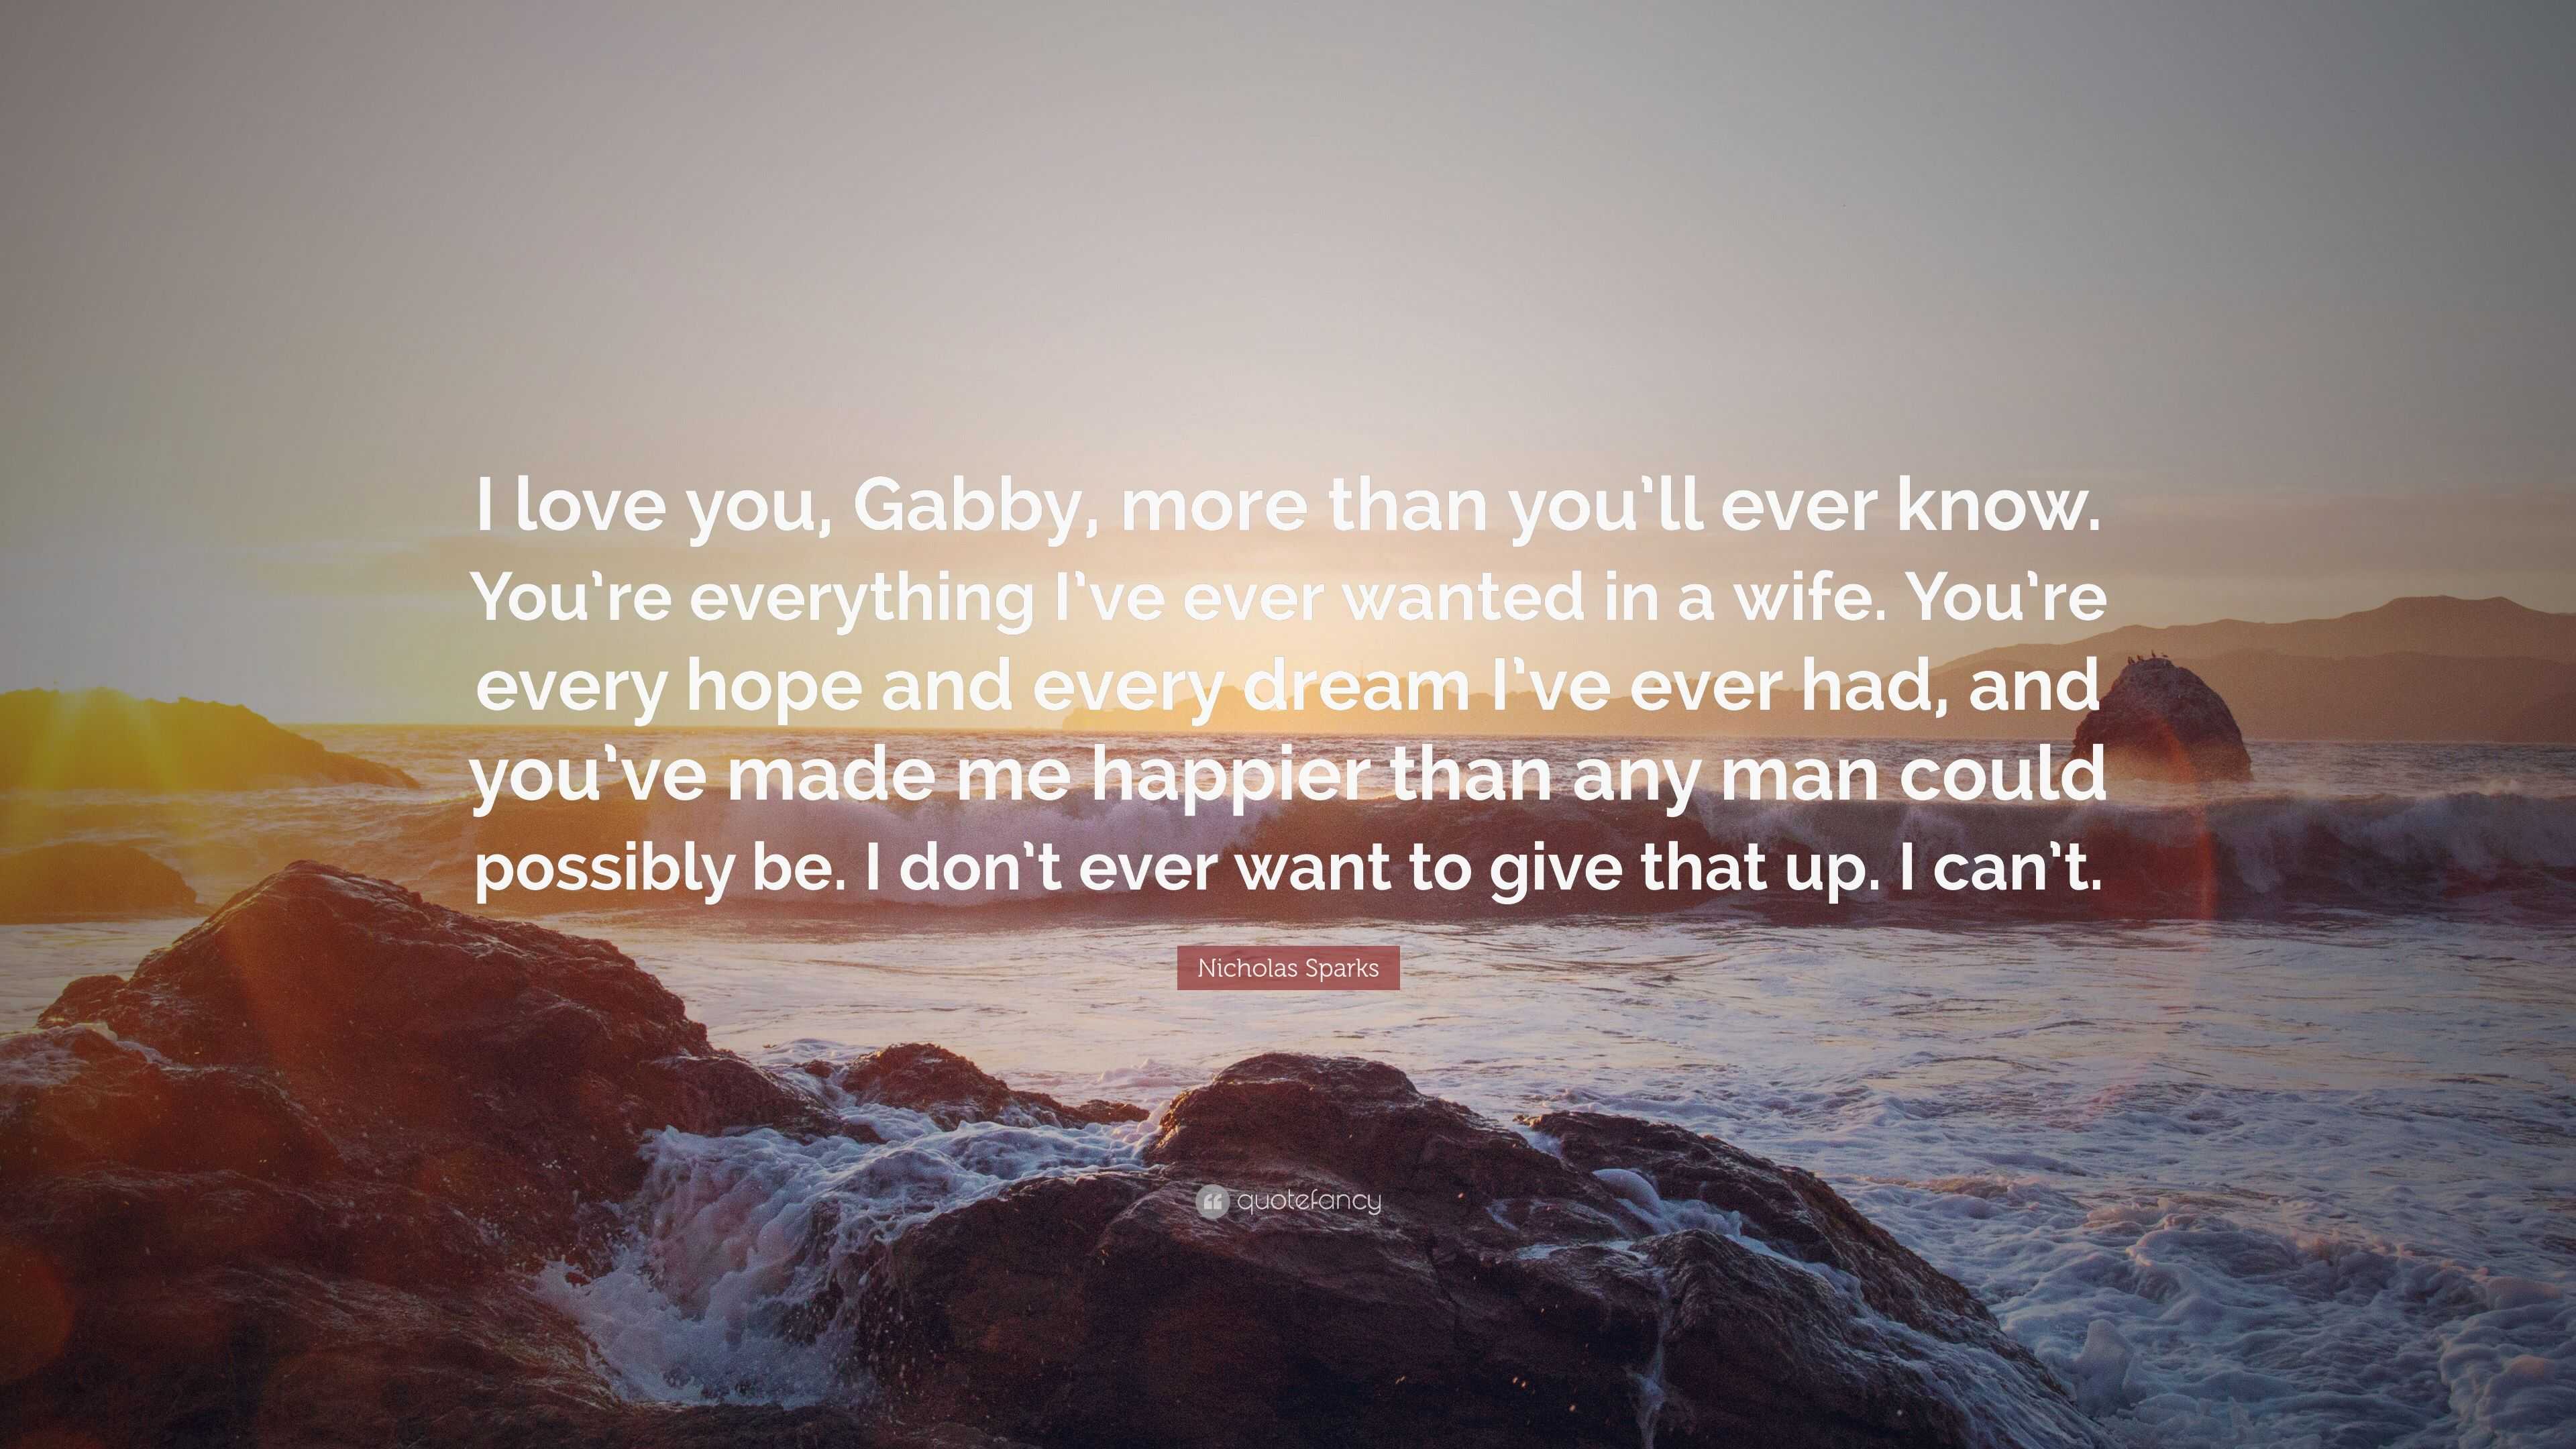 Nicholas Sparks Quote I Love You Gabby More Than You Ll Ever Know You Re Everything I Ve Ever Wanted In A Wife You Re Every Hope And Every